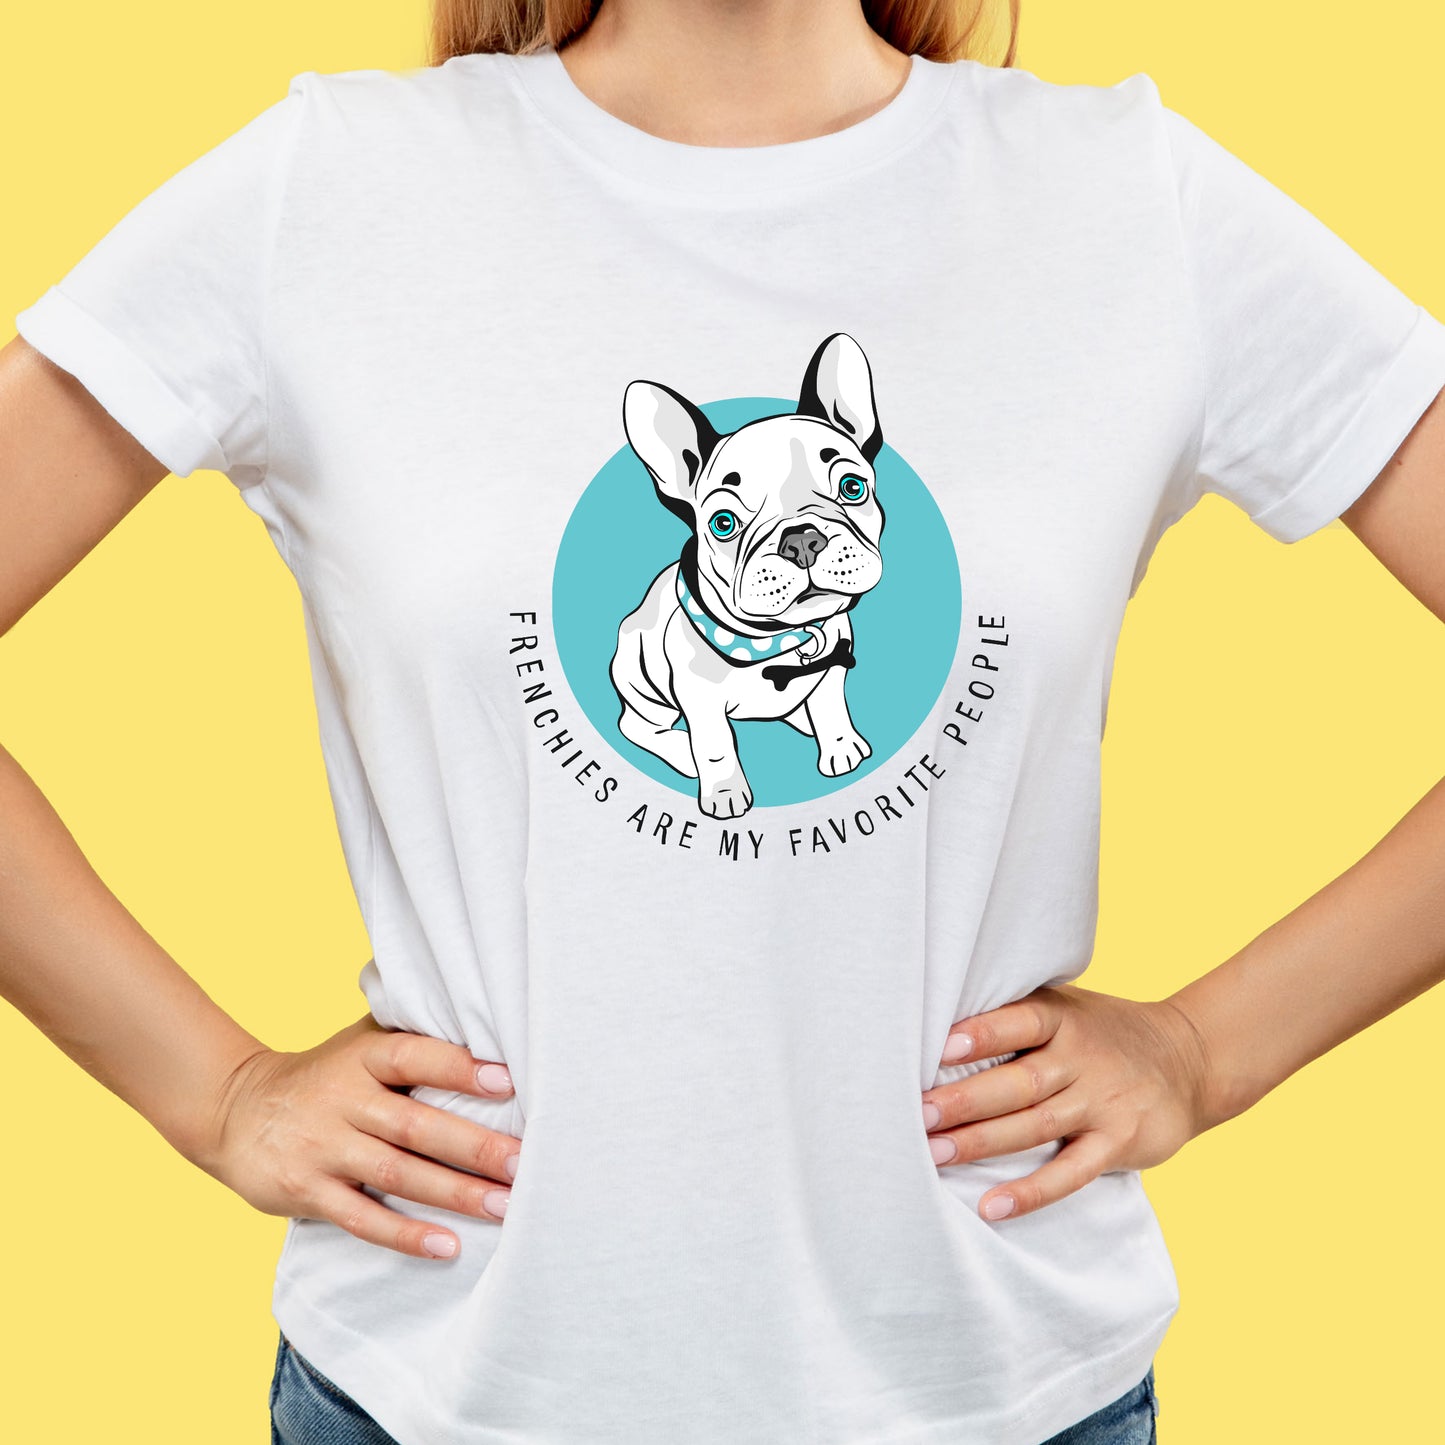 French Bulldog T-Shirt With Cute Frenchie TShirt With Cute Dog T Shirt With Favorite Dog T-Shirt For Frenchie Lover Gift With Frenchies Are My Favorite People TShirt